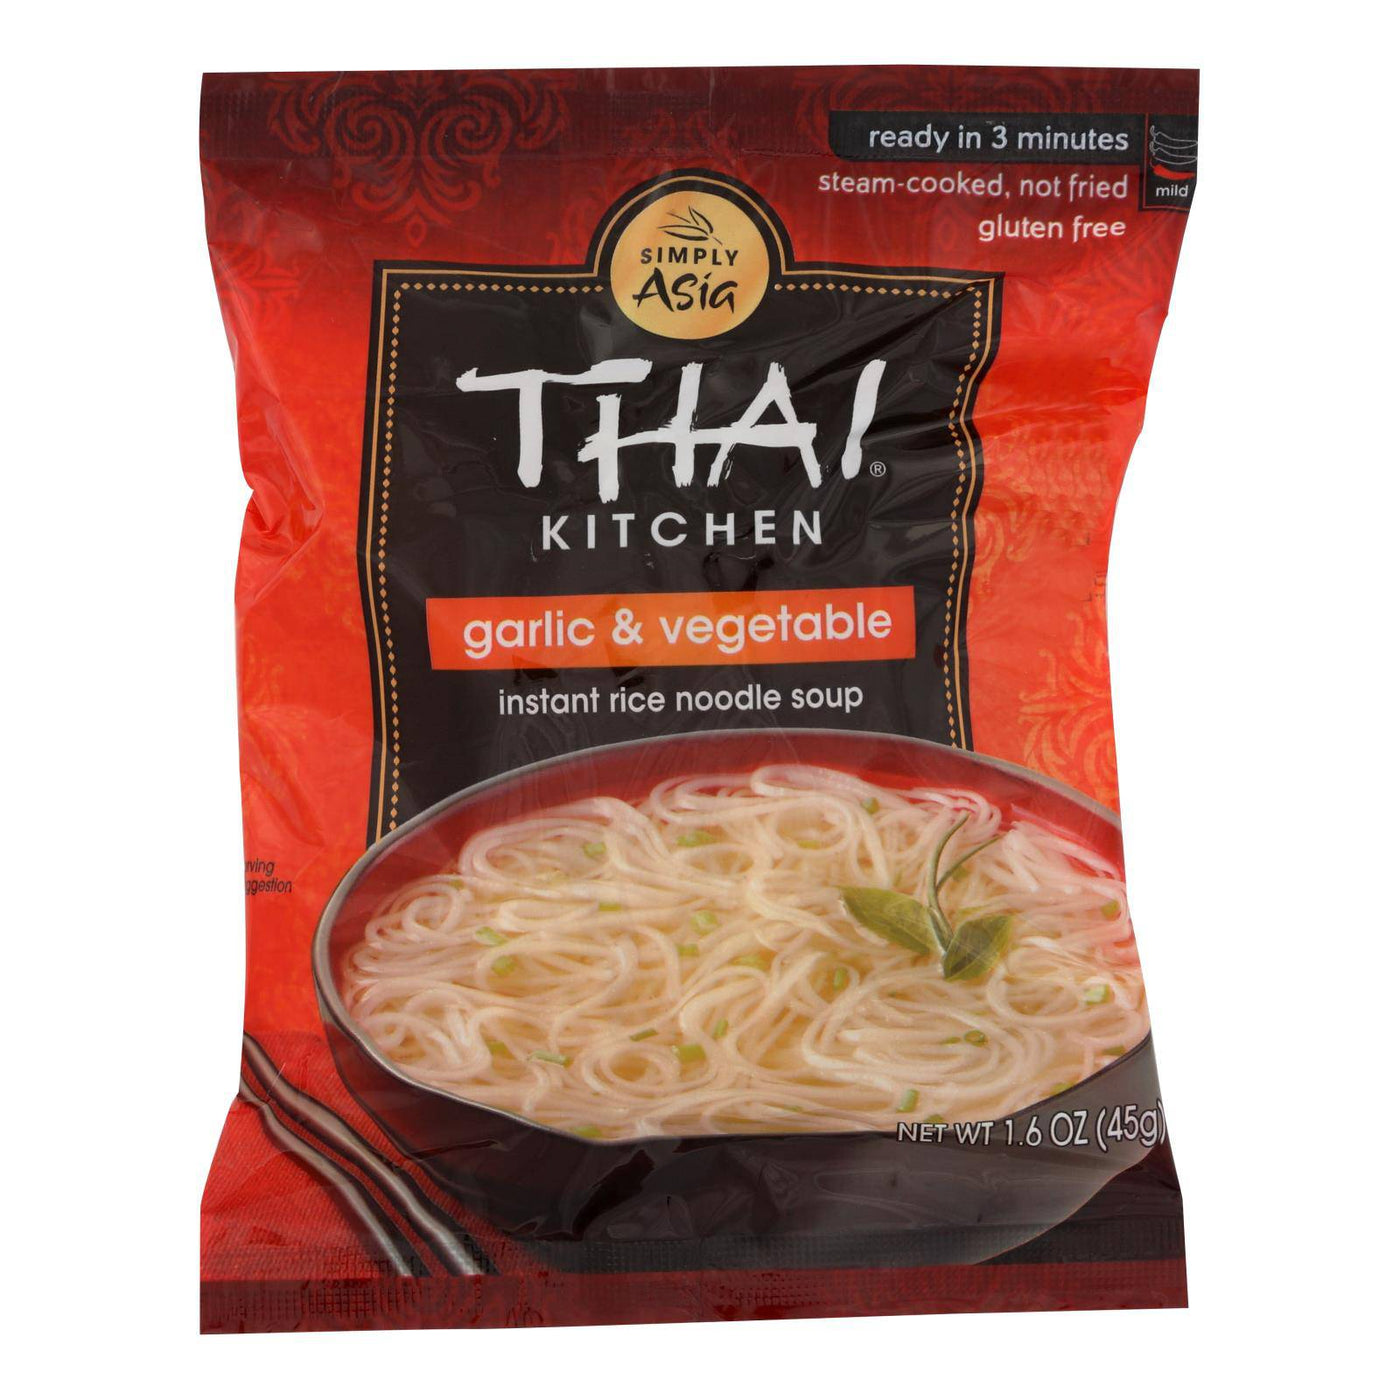 Buy Thai Kitchen Instant Rice Noodle Soup - Garlic And Vegetable - Mild - 1.6 Oz - Case Of 6  at OnlyNaturals.us